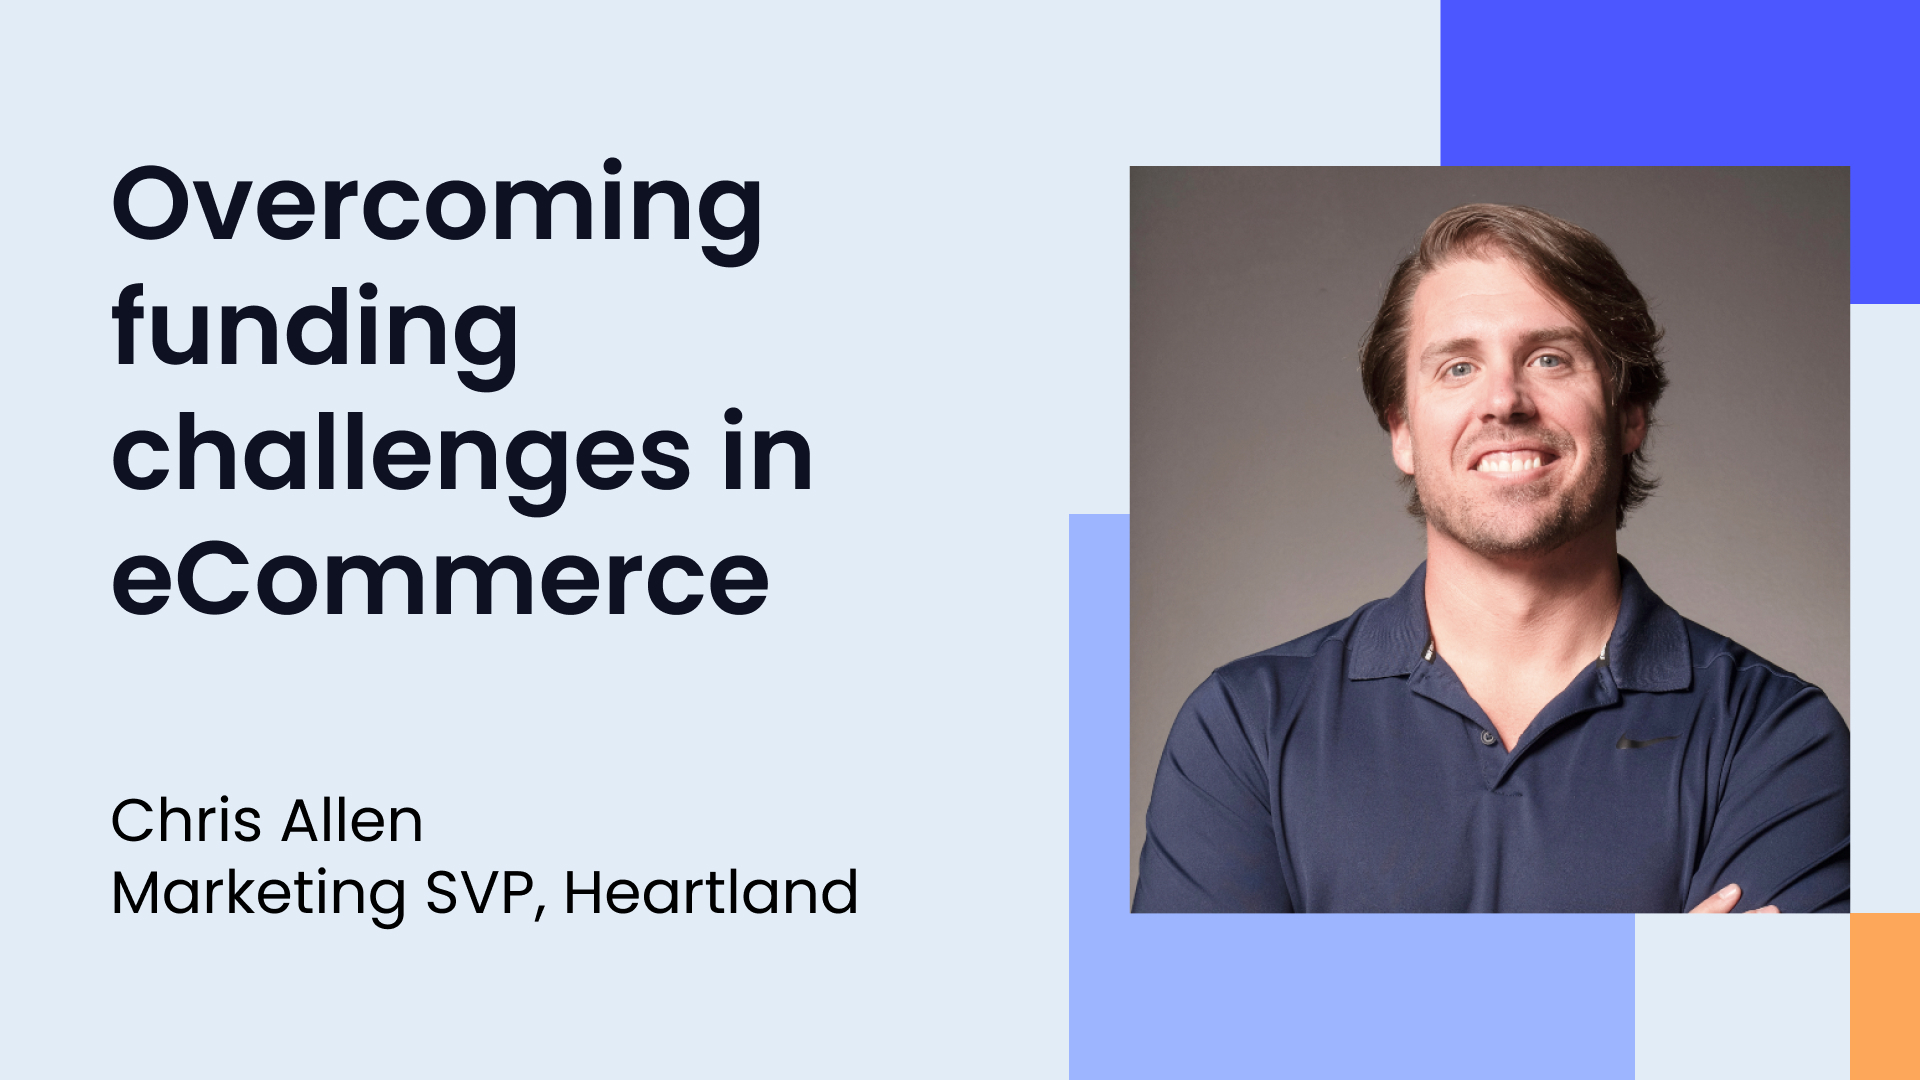 Chris Allen is the SVP of Marketing at Heartland, a people-centric fintech company helping over 1 Million entrepreneurs run and grow their businesses.